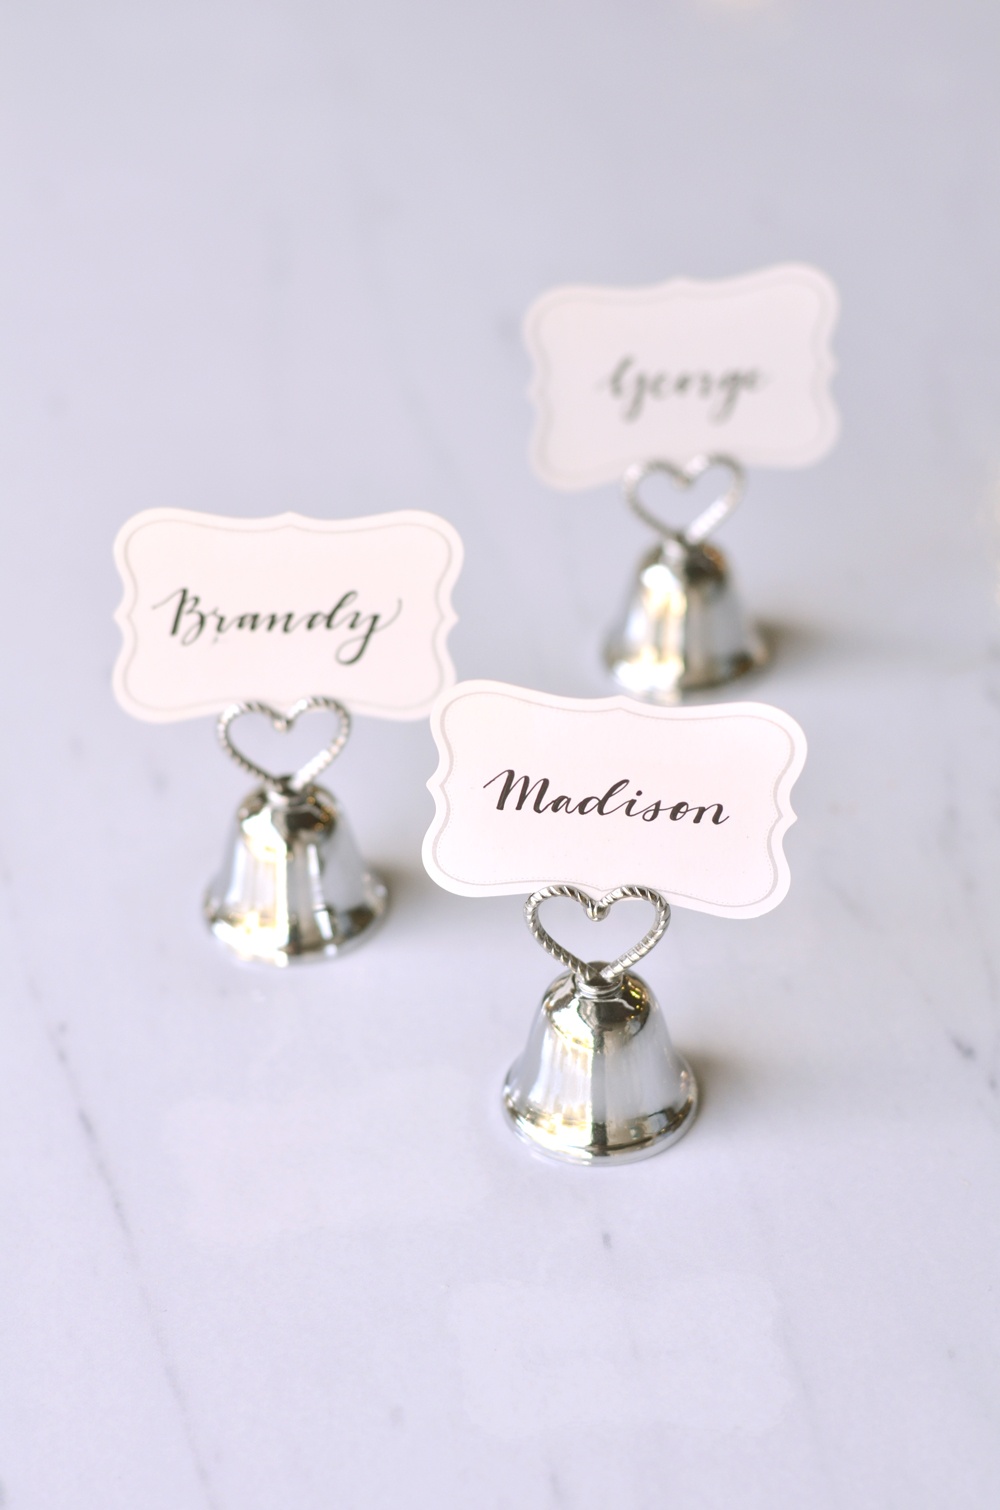 Faux calligraphy wedding place cards 